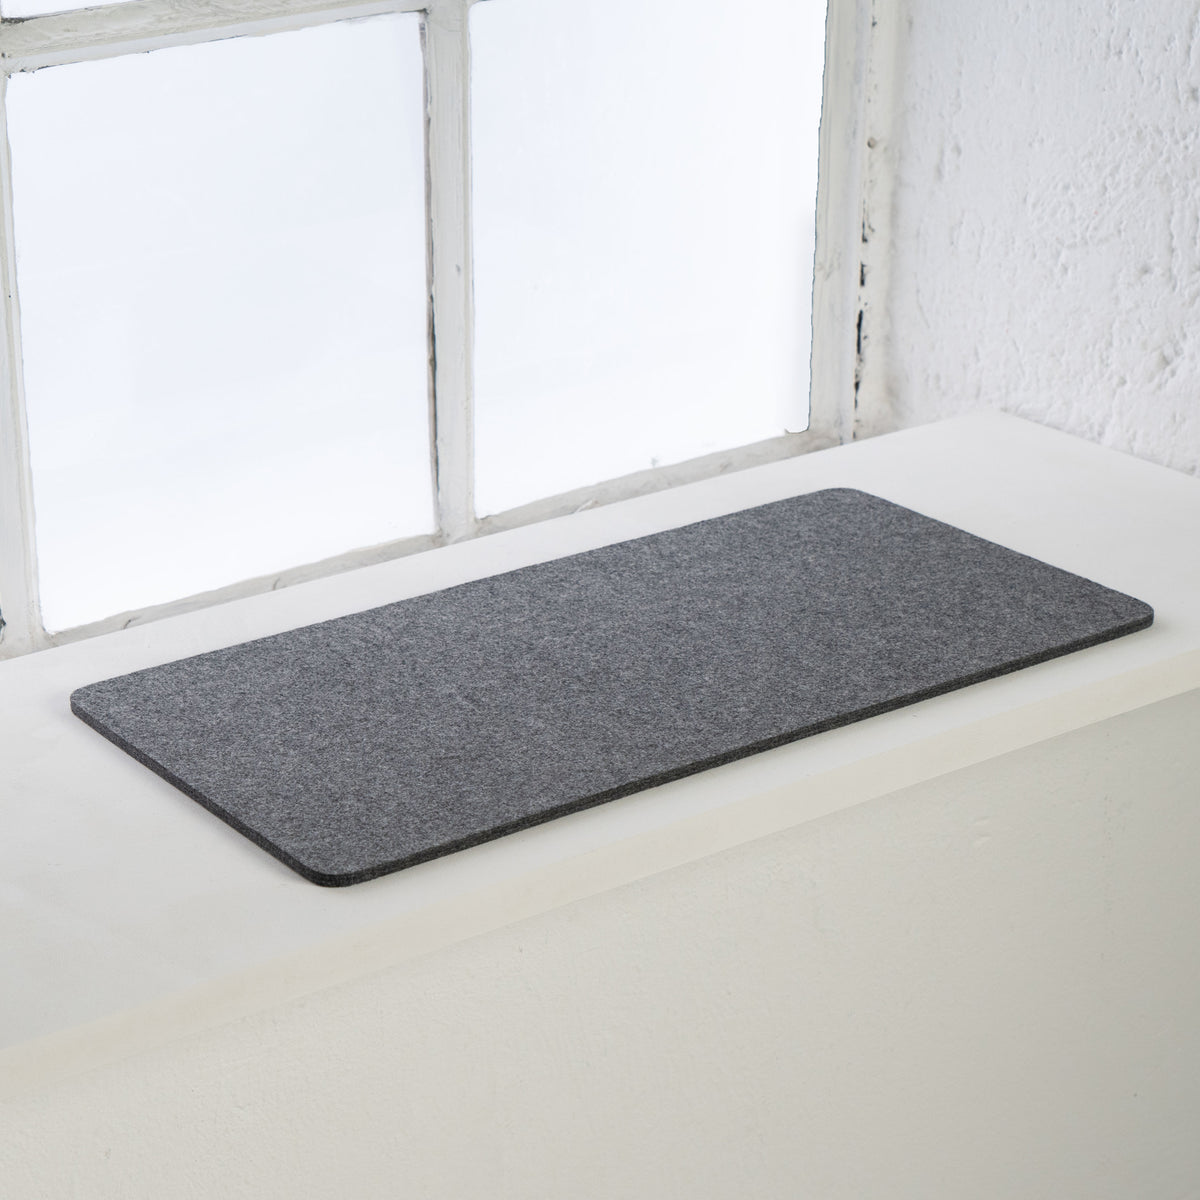 FELTY wool felt pad for window sill (also for STRAIGHT)